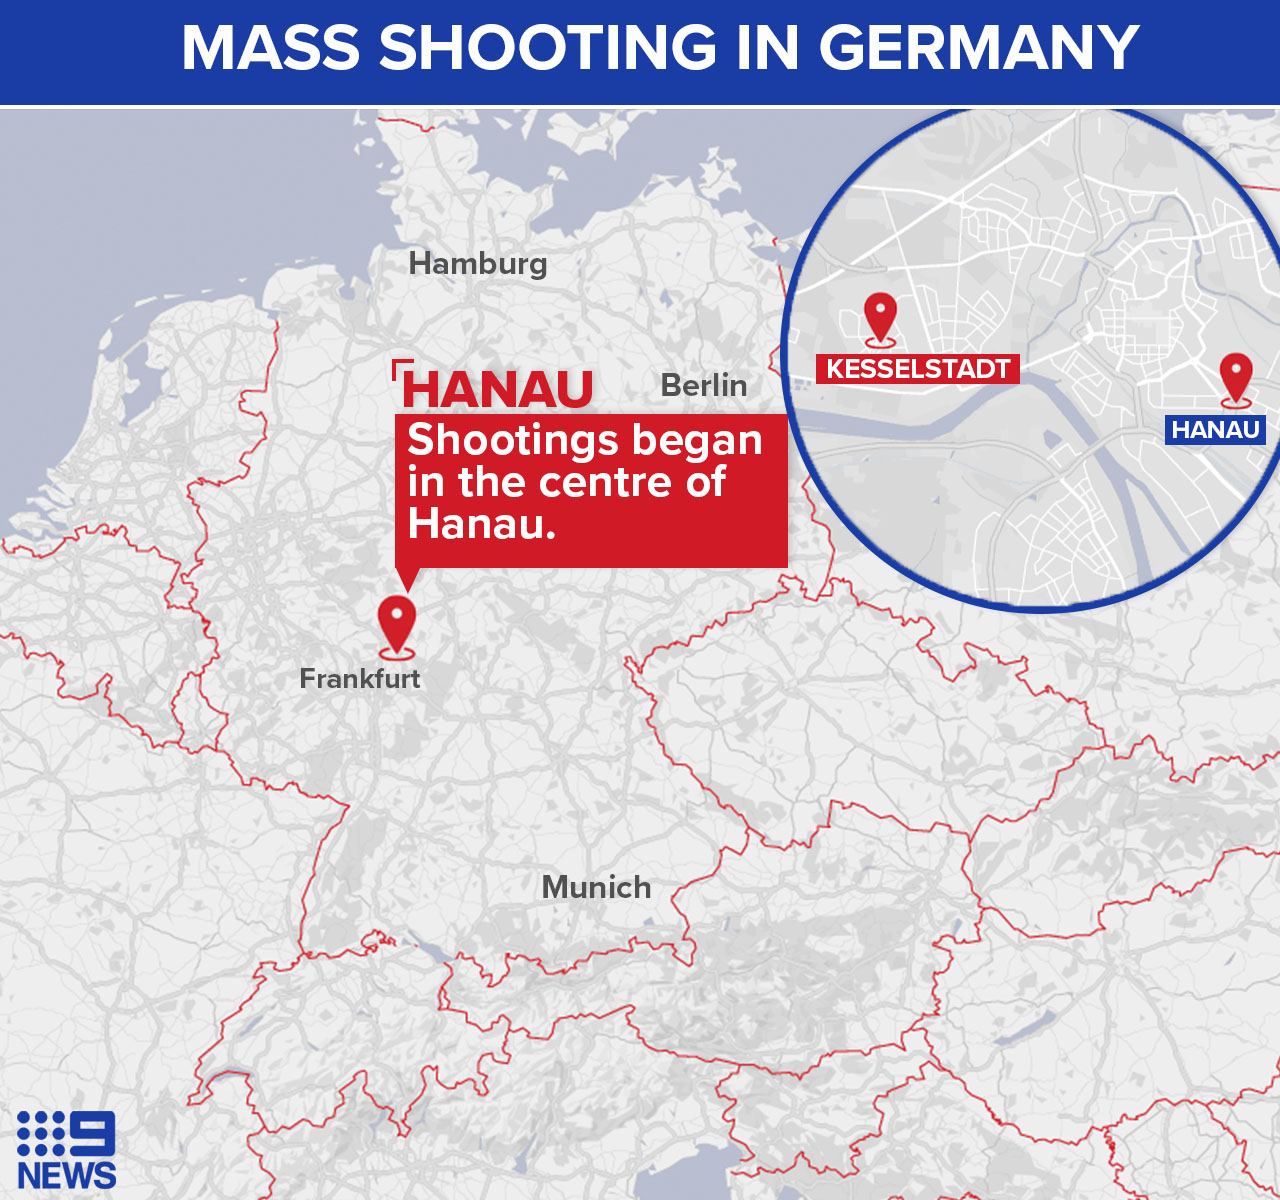 The gunman shot at least three people in Hanau before driving to Kesselstadt to kill another five.